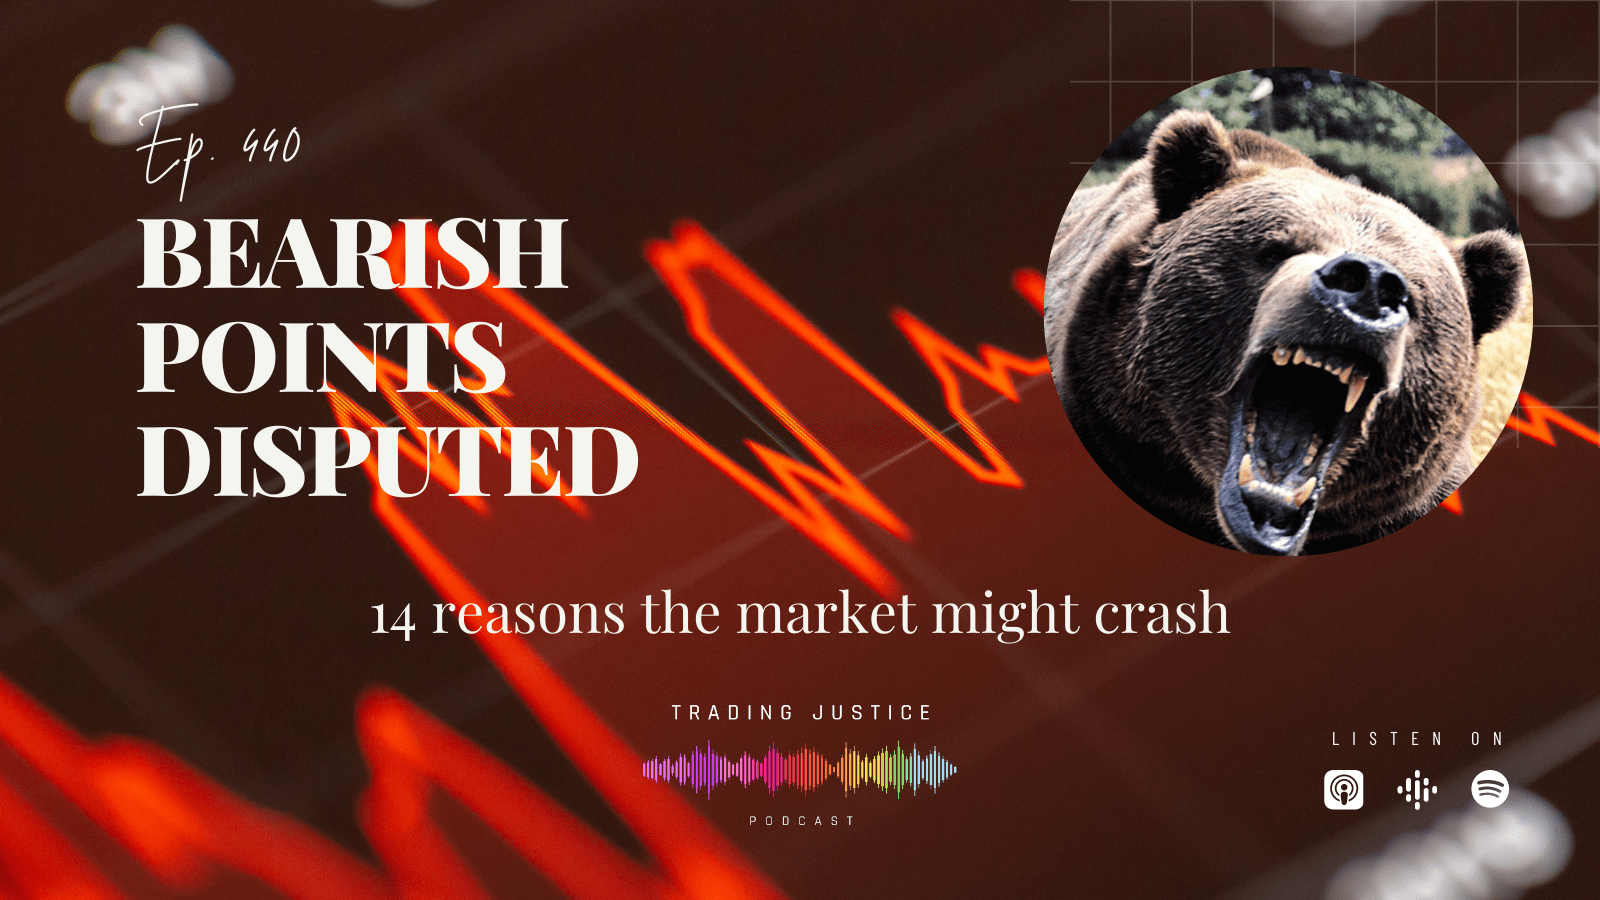 Trading Justice 440 – Bearish Points Disputed